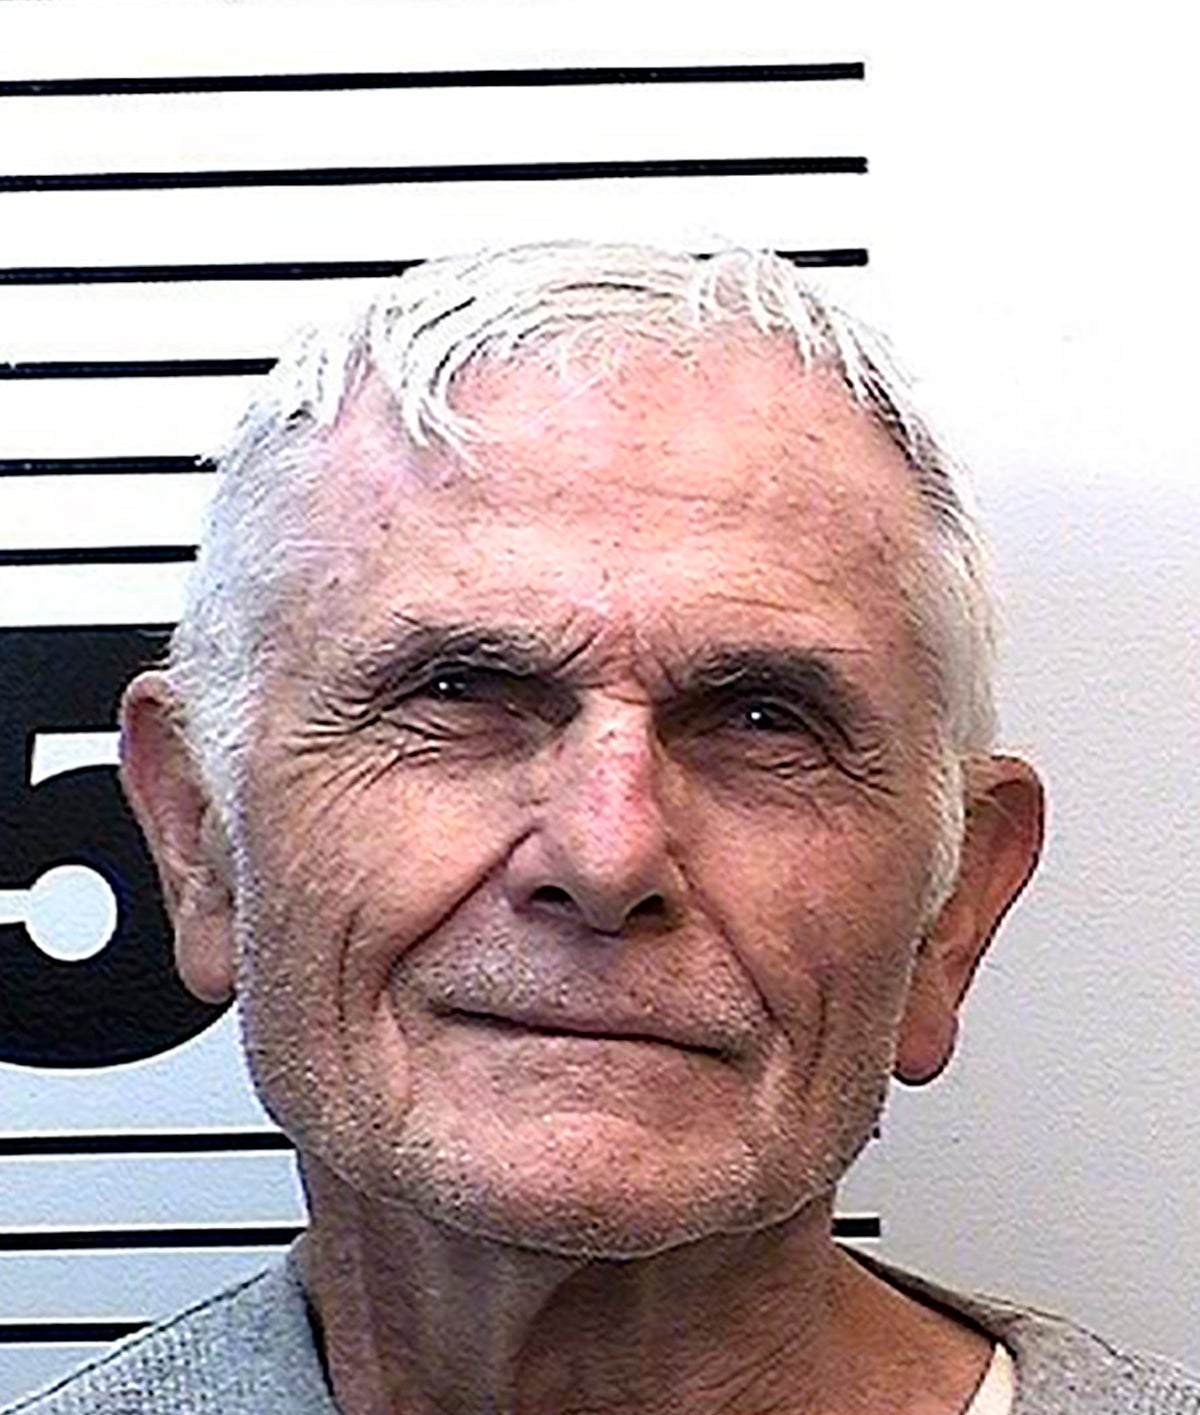 Parole denied for Manson follower for slayings in 1969